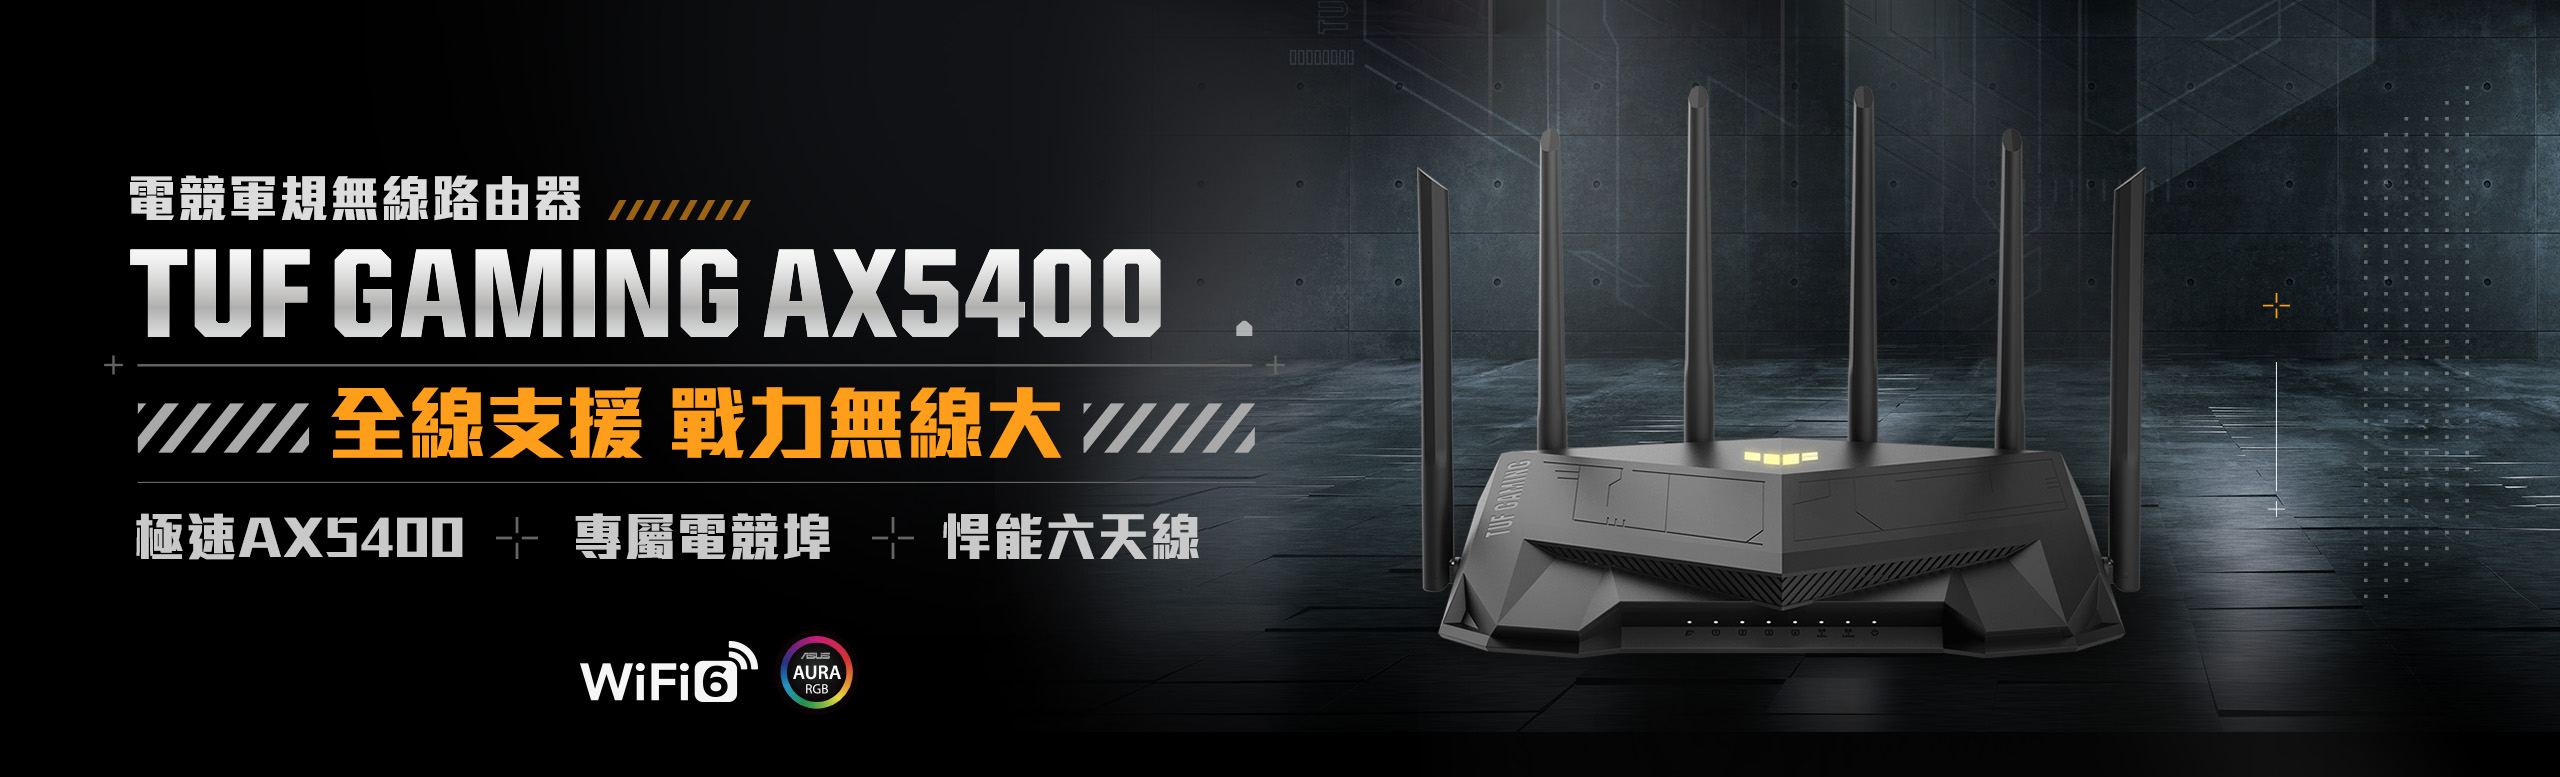 TUF-AX5400 Gaming Router 